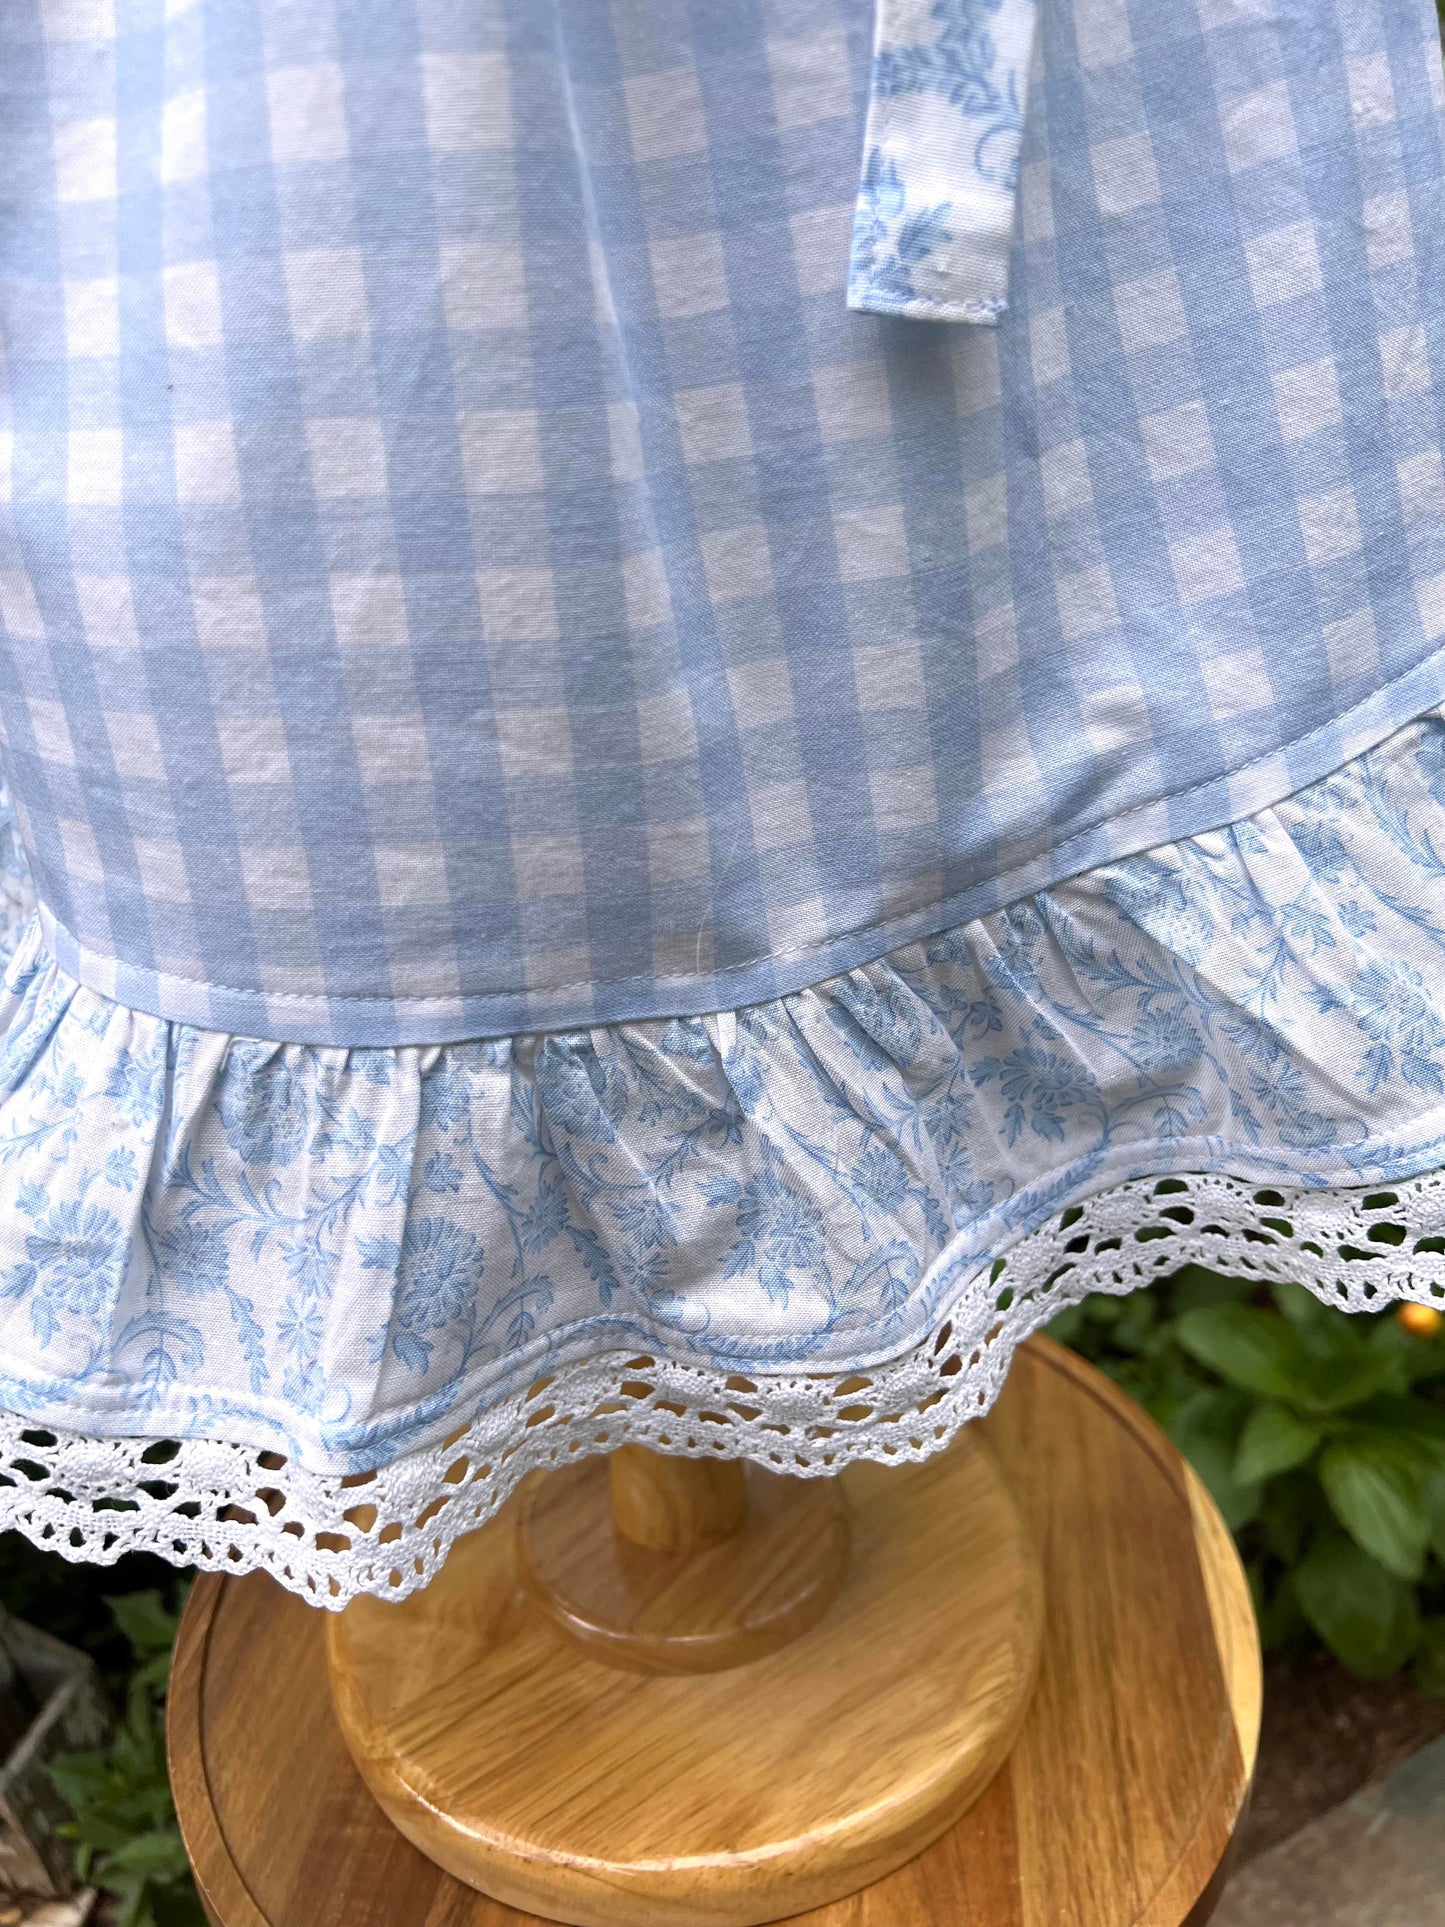 Toddlers size 12-18 month pretty blue plaid and floral summer dress with vintage lace, sleeveless. Cotton. Free Shipping.